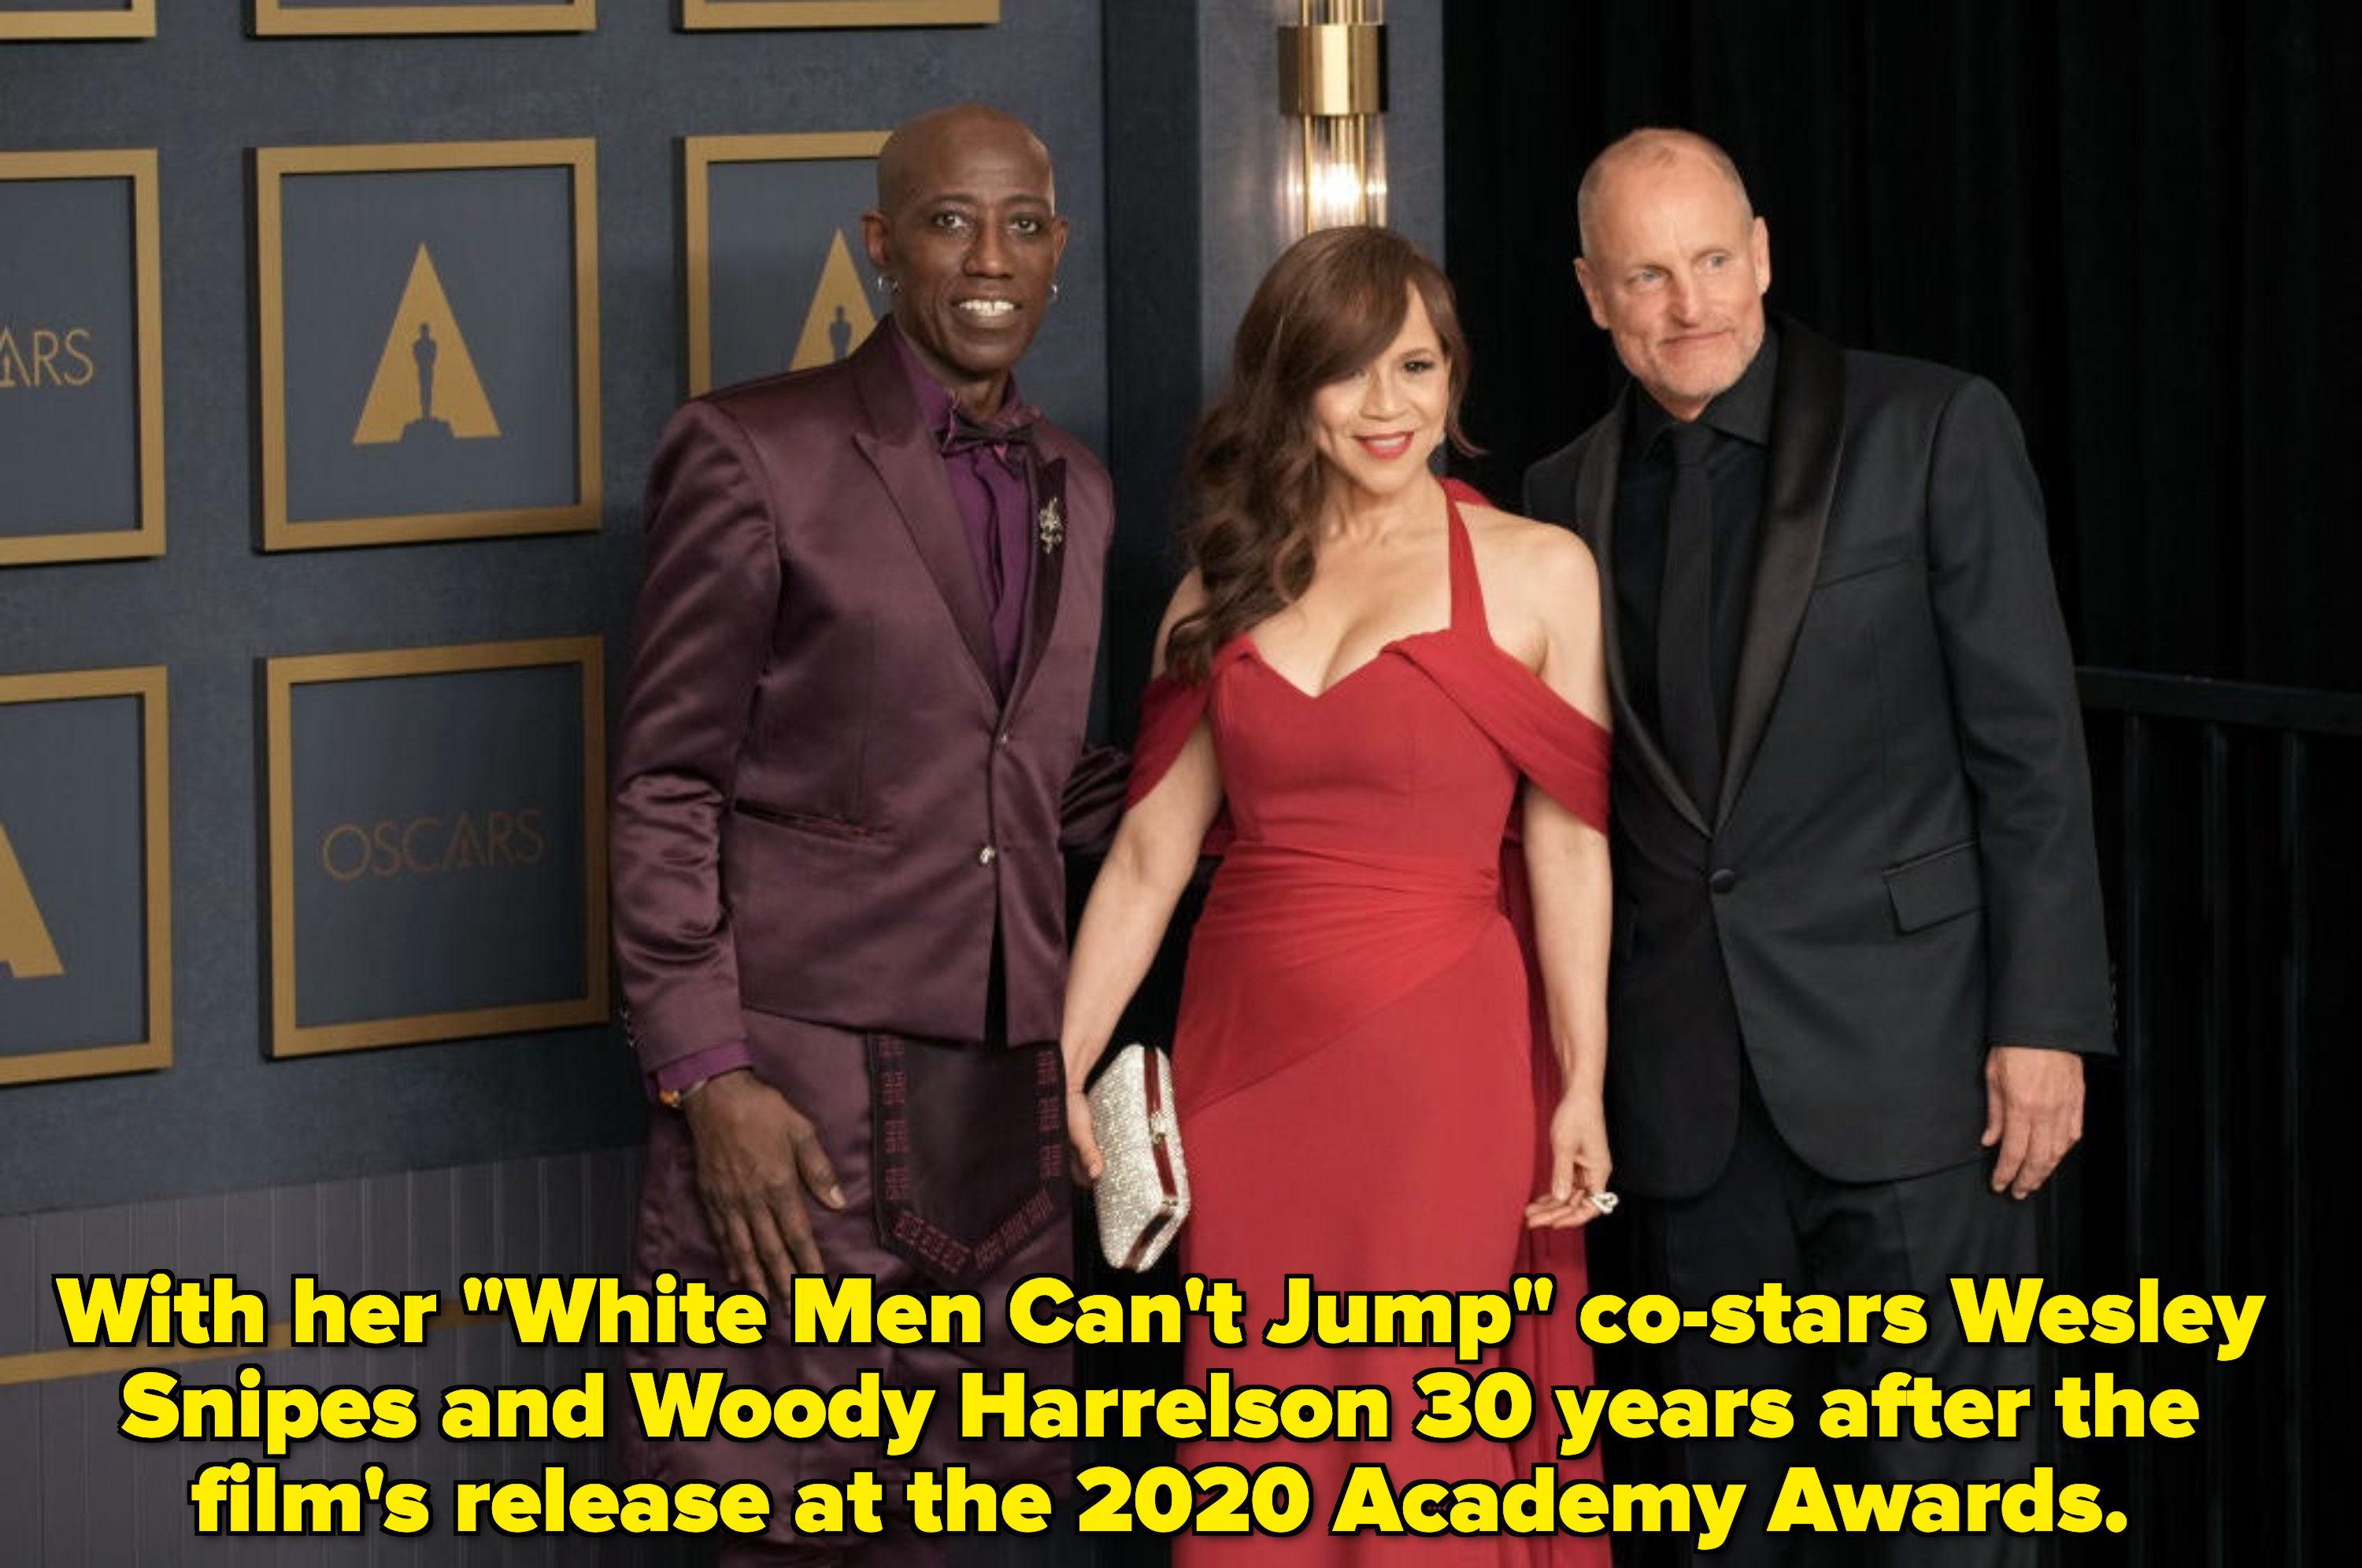 Wesley Snipes, Perez, and Woody Harrelson pose for a photo at the Academy Awards